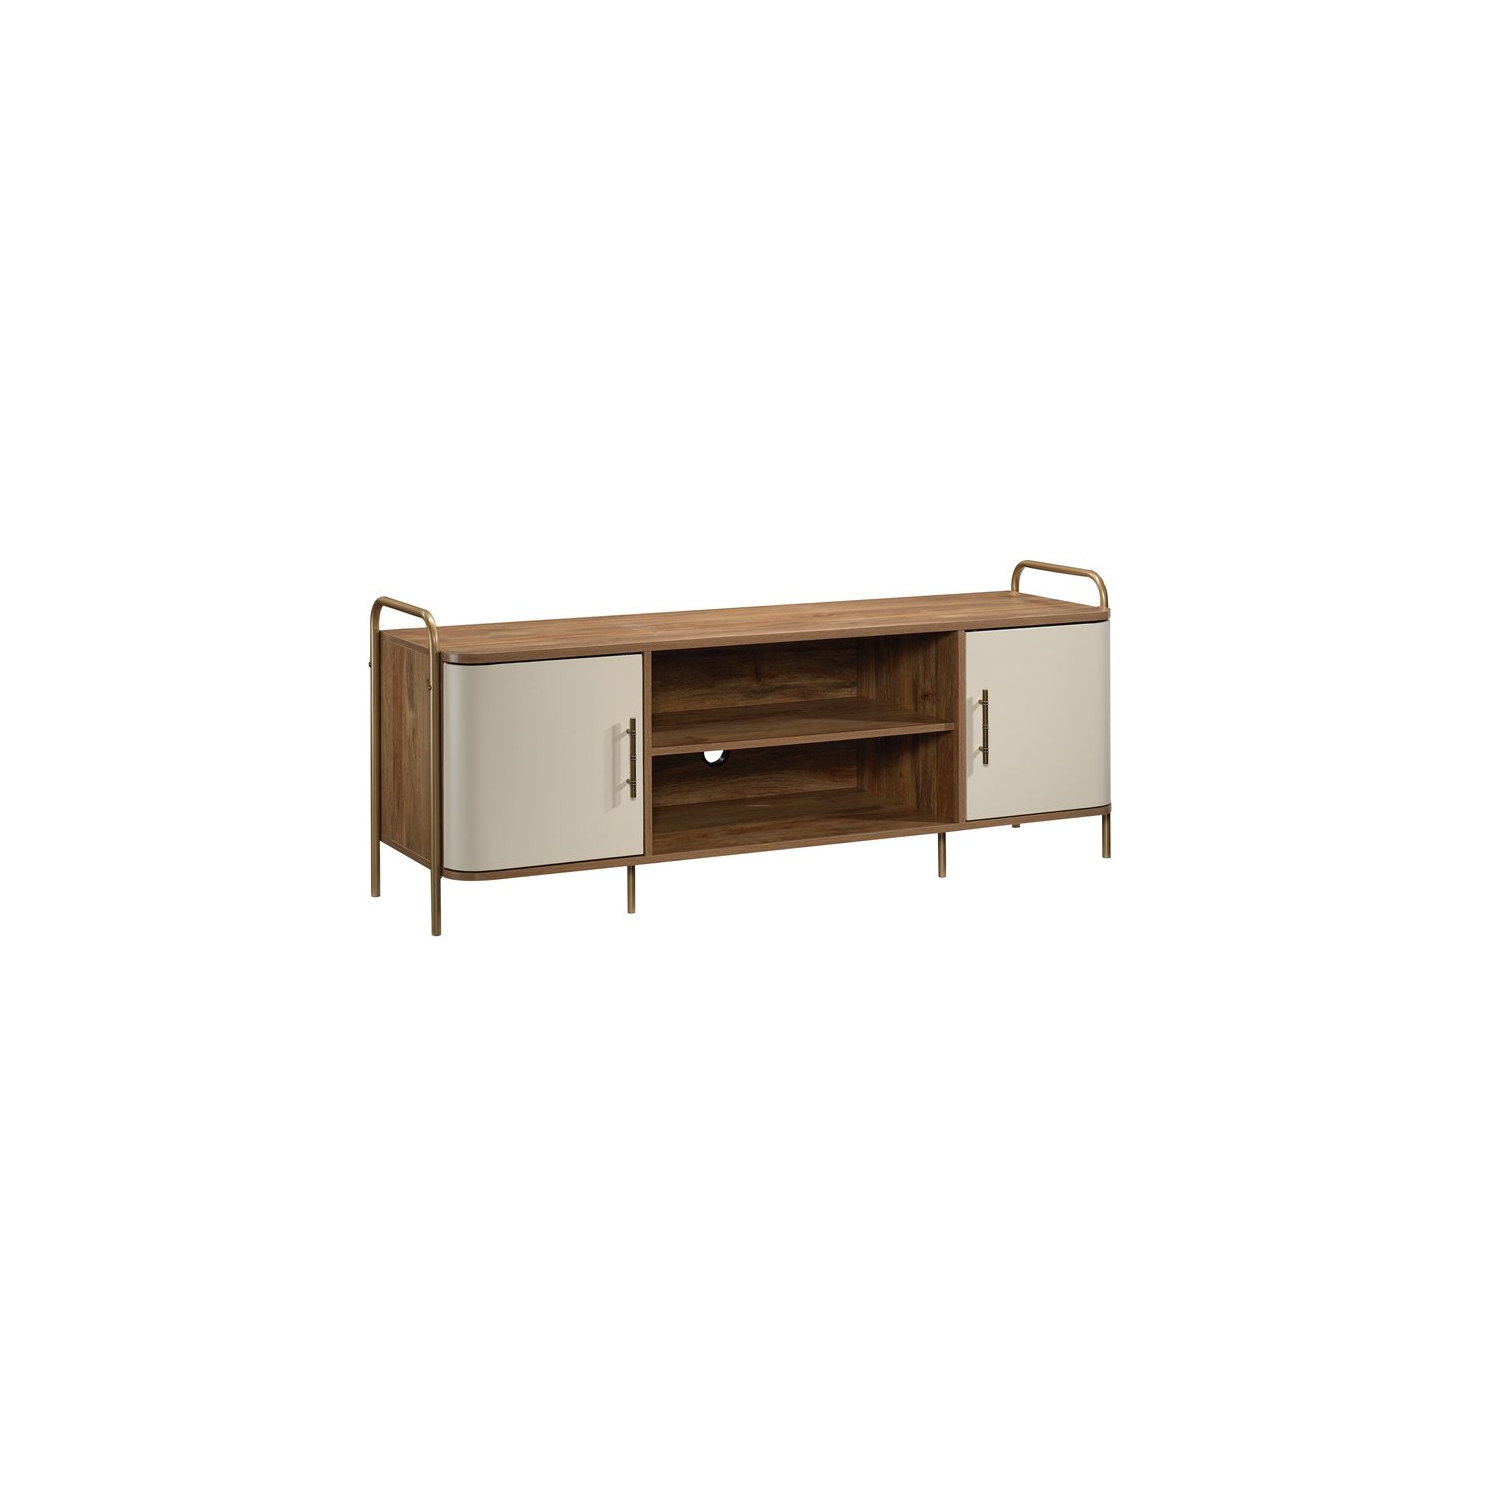 Sauder Coral Cape 60" Wood Entertainment Tv Stand in Sindoori Mango and Gold